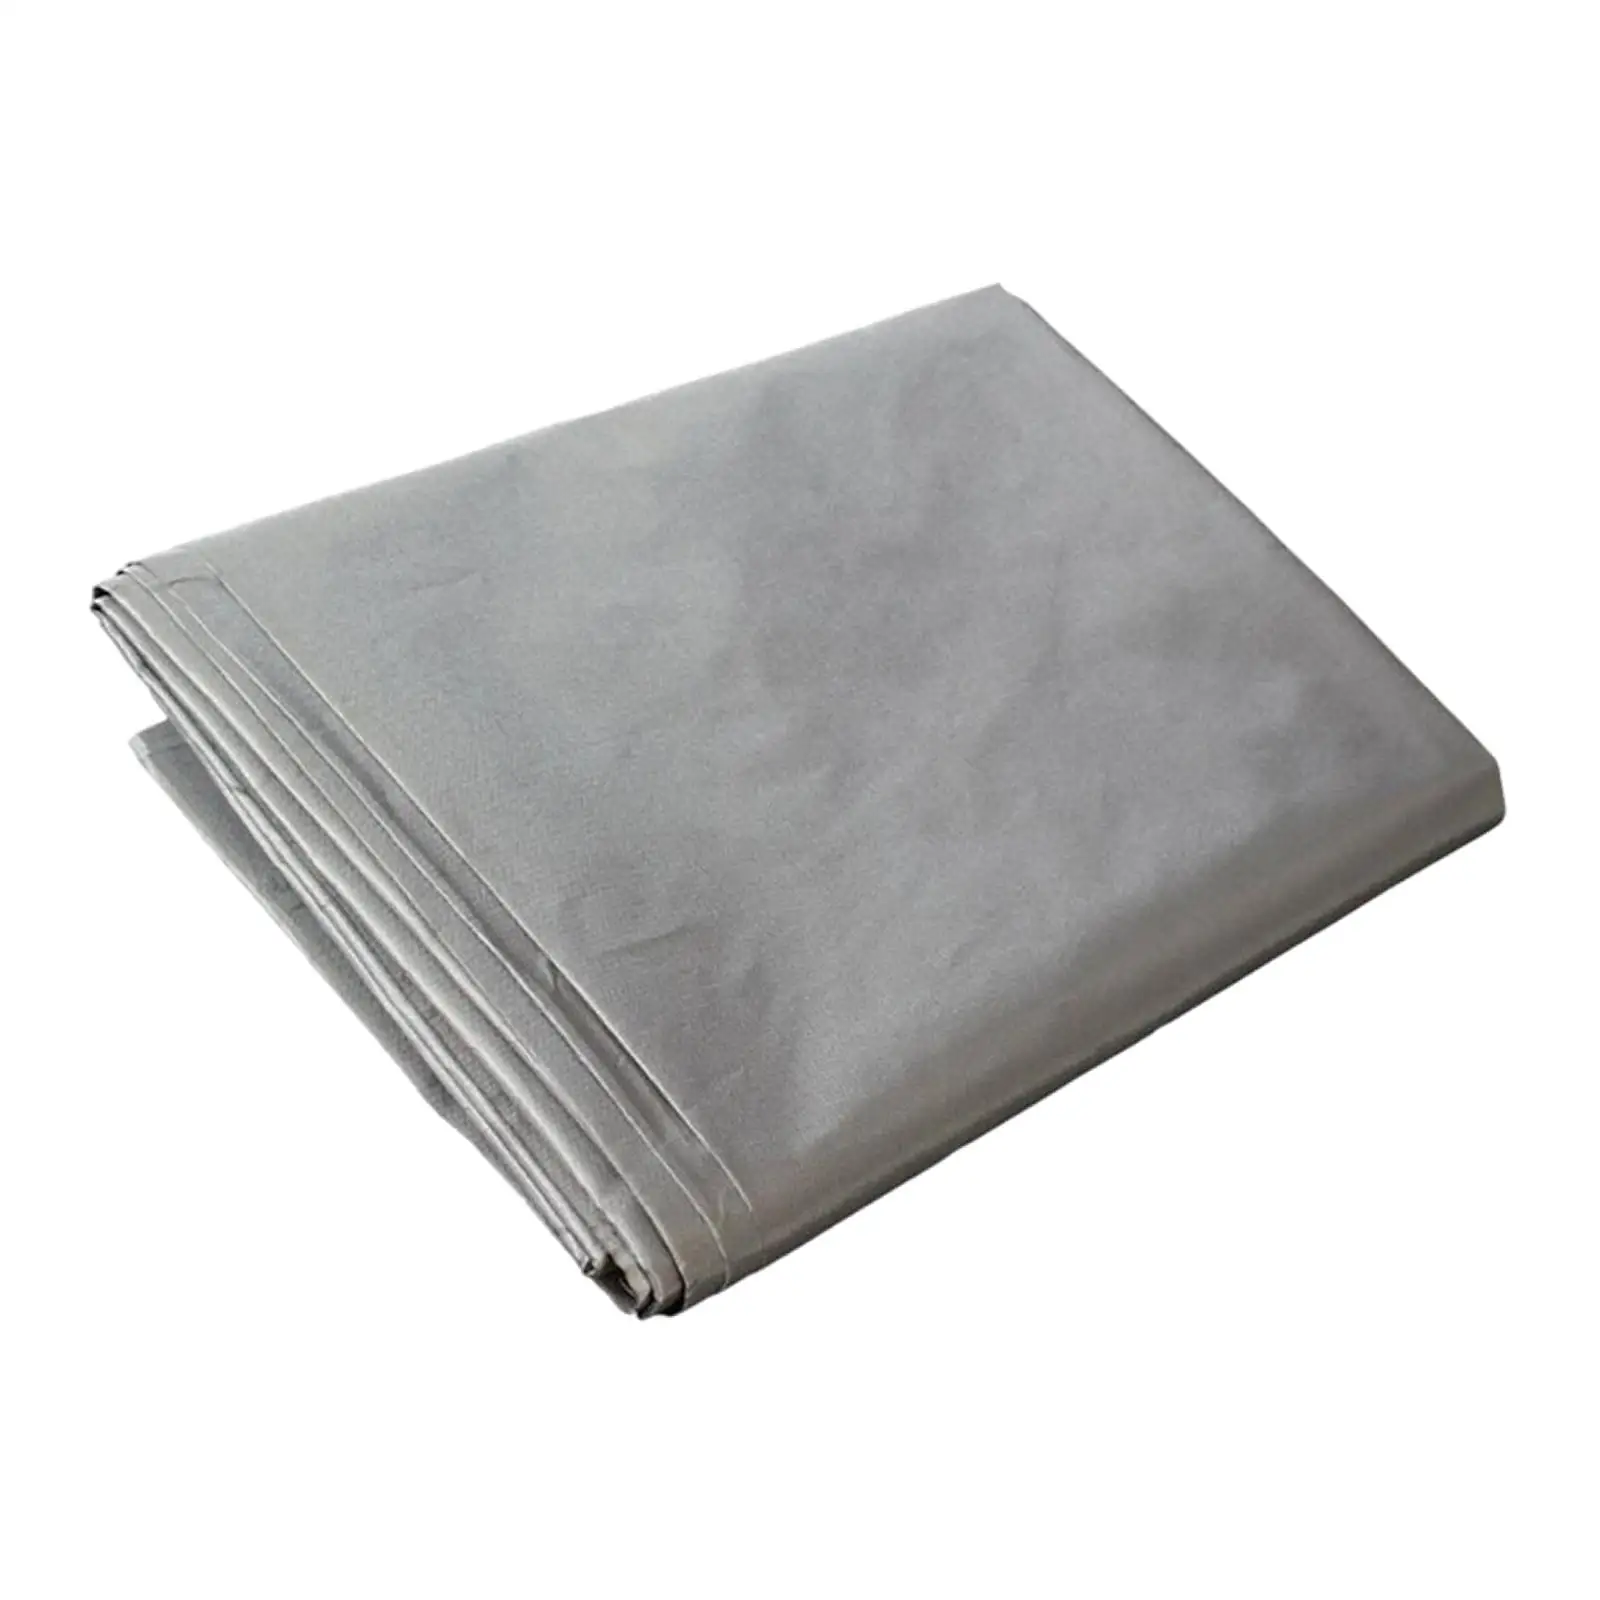 Shielding Fabric Radiation Protection Shield Copper Fabric Blocker Industry Use Electromagnetic Blocking Cloth Blocking Fabric